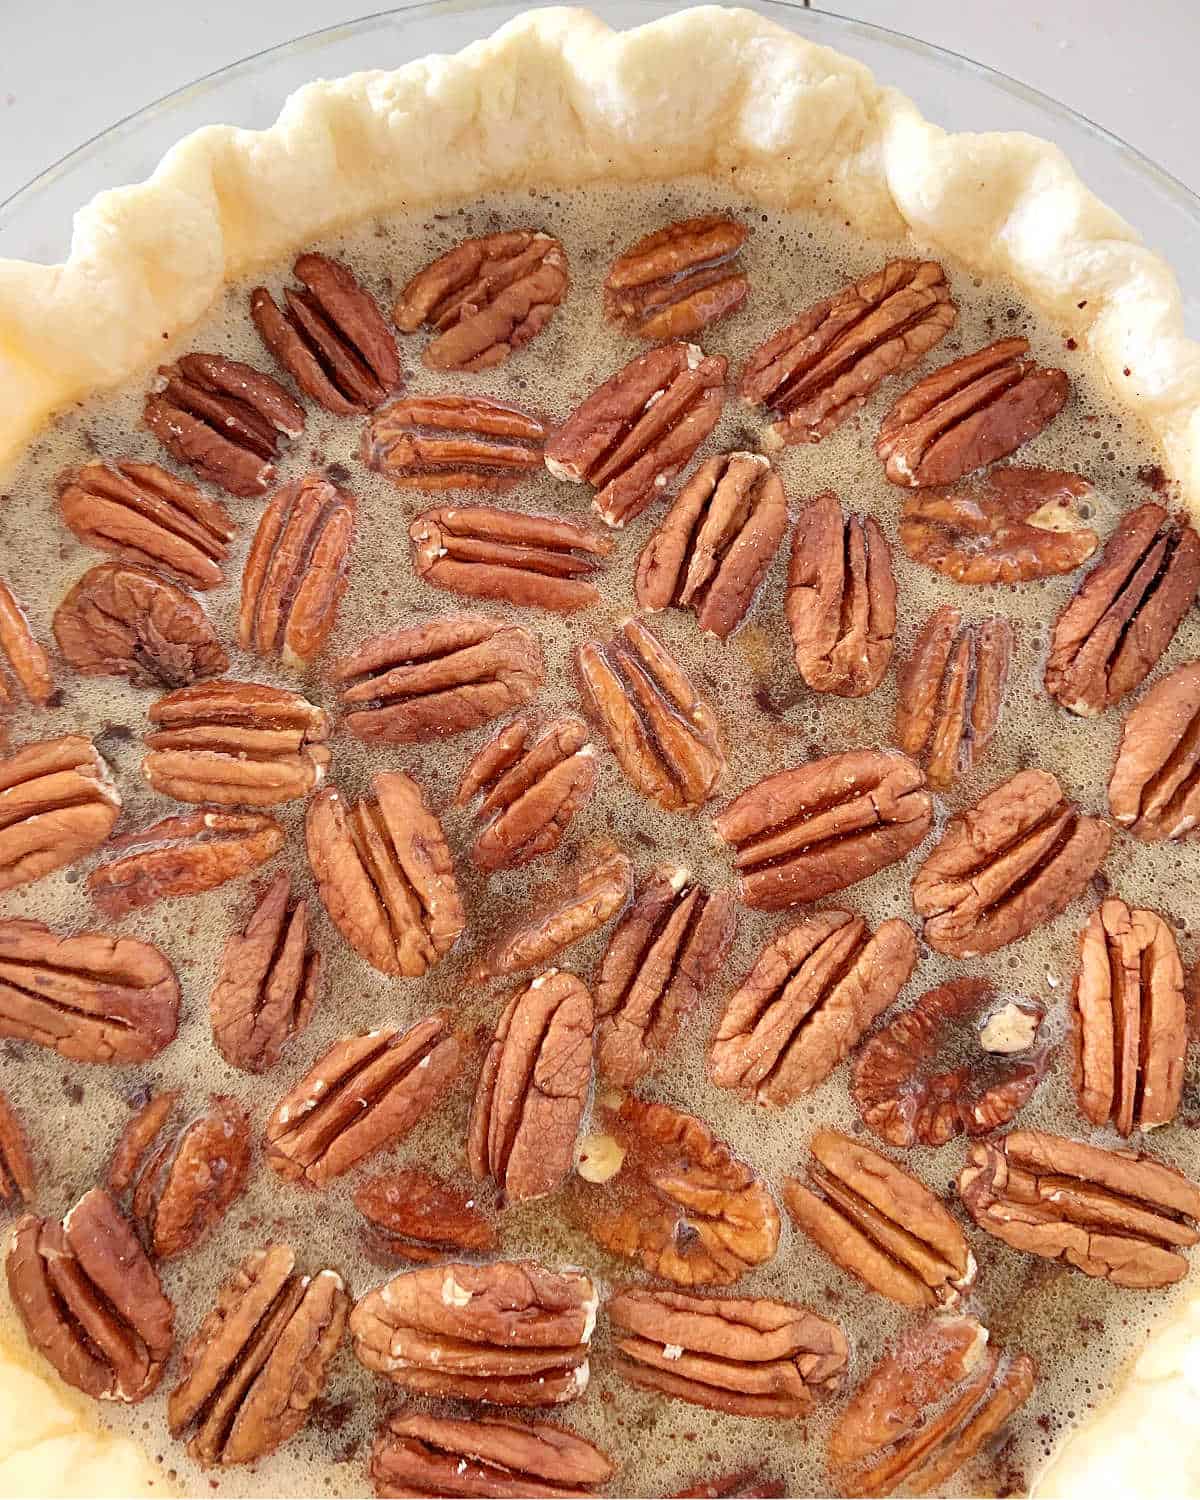 Pecan pie filling in the pre baked pie shell.